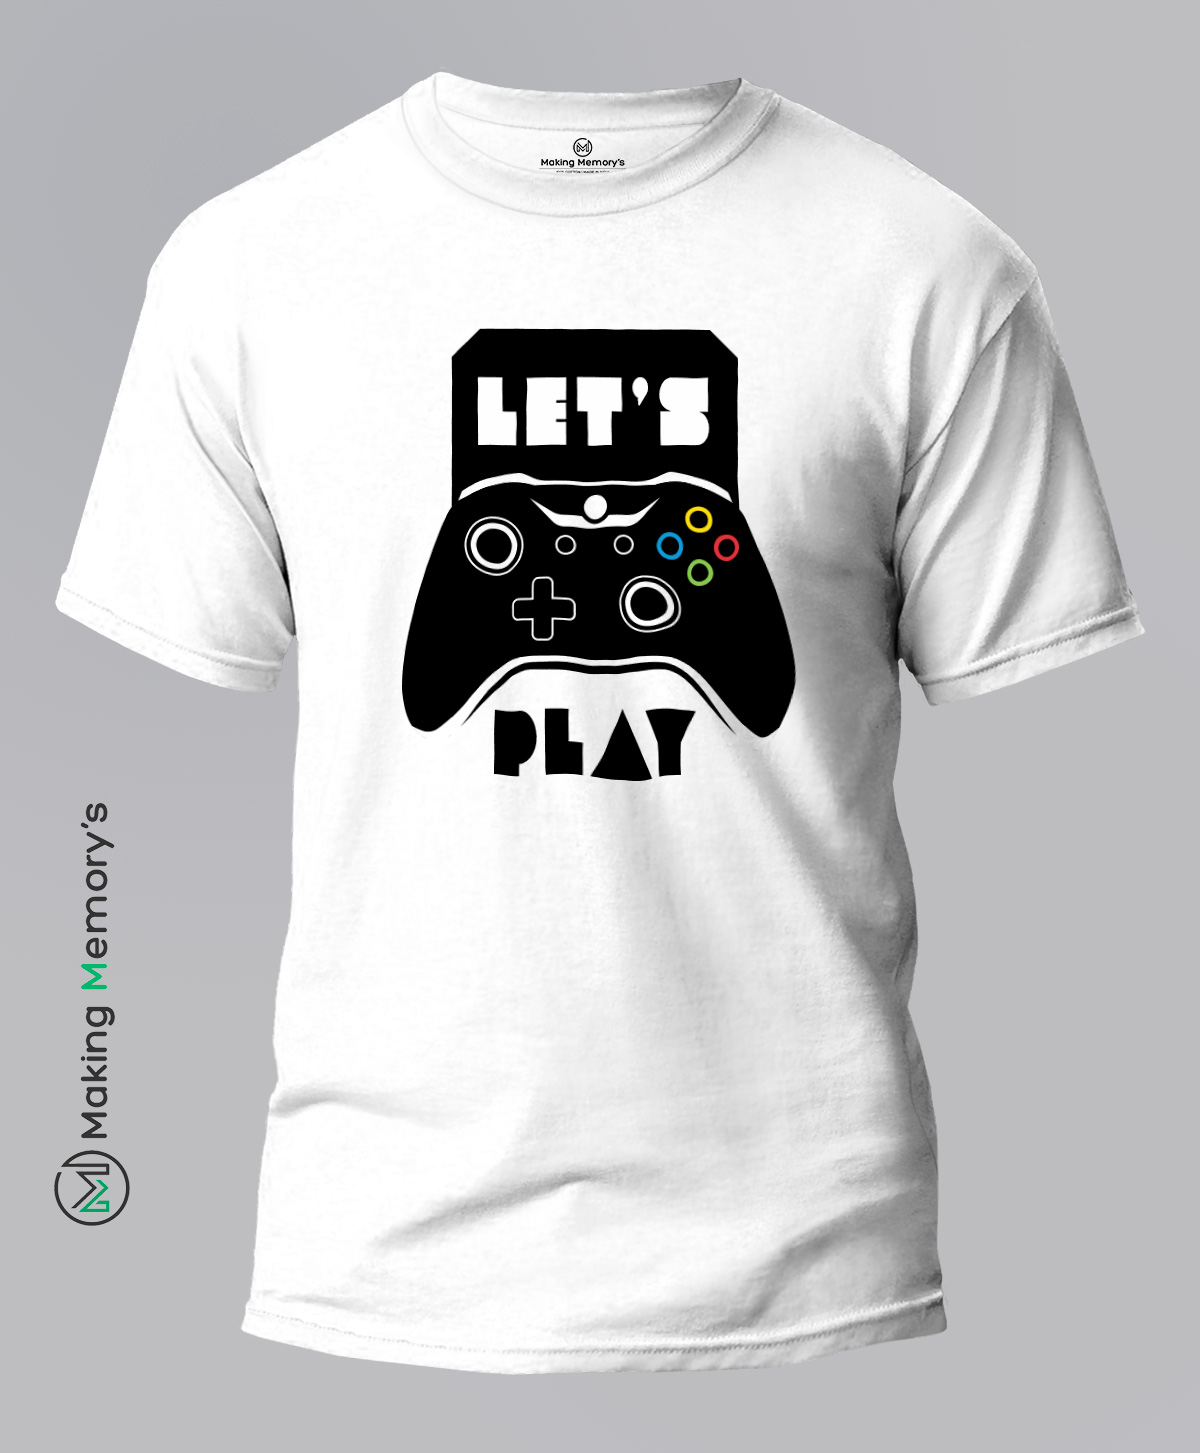 Let's-Play-White-T-Shirt